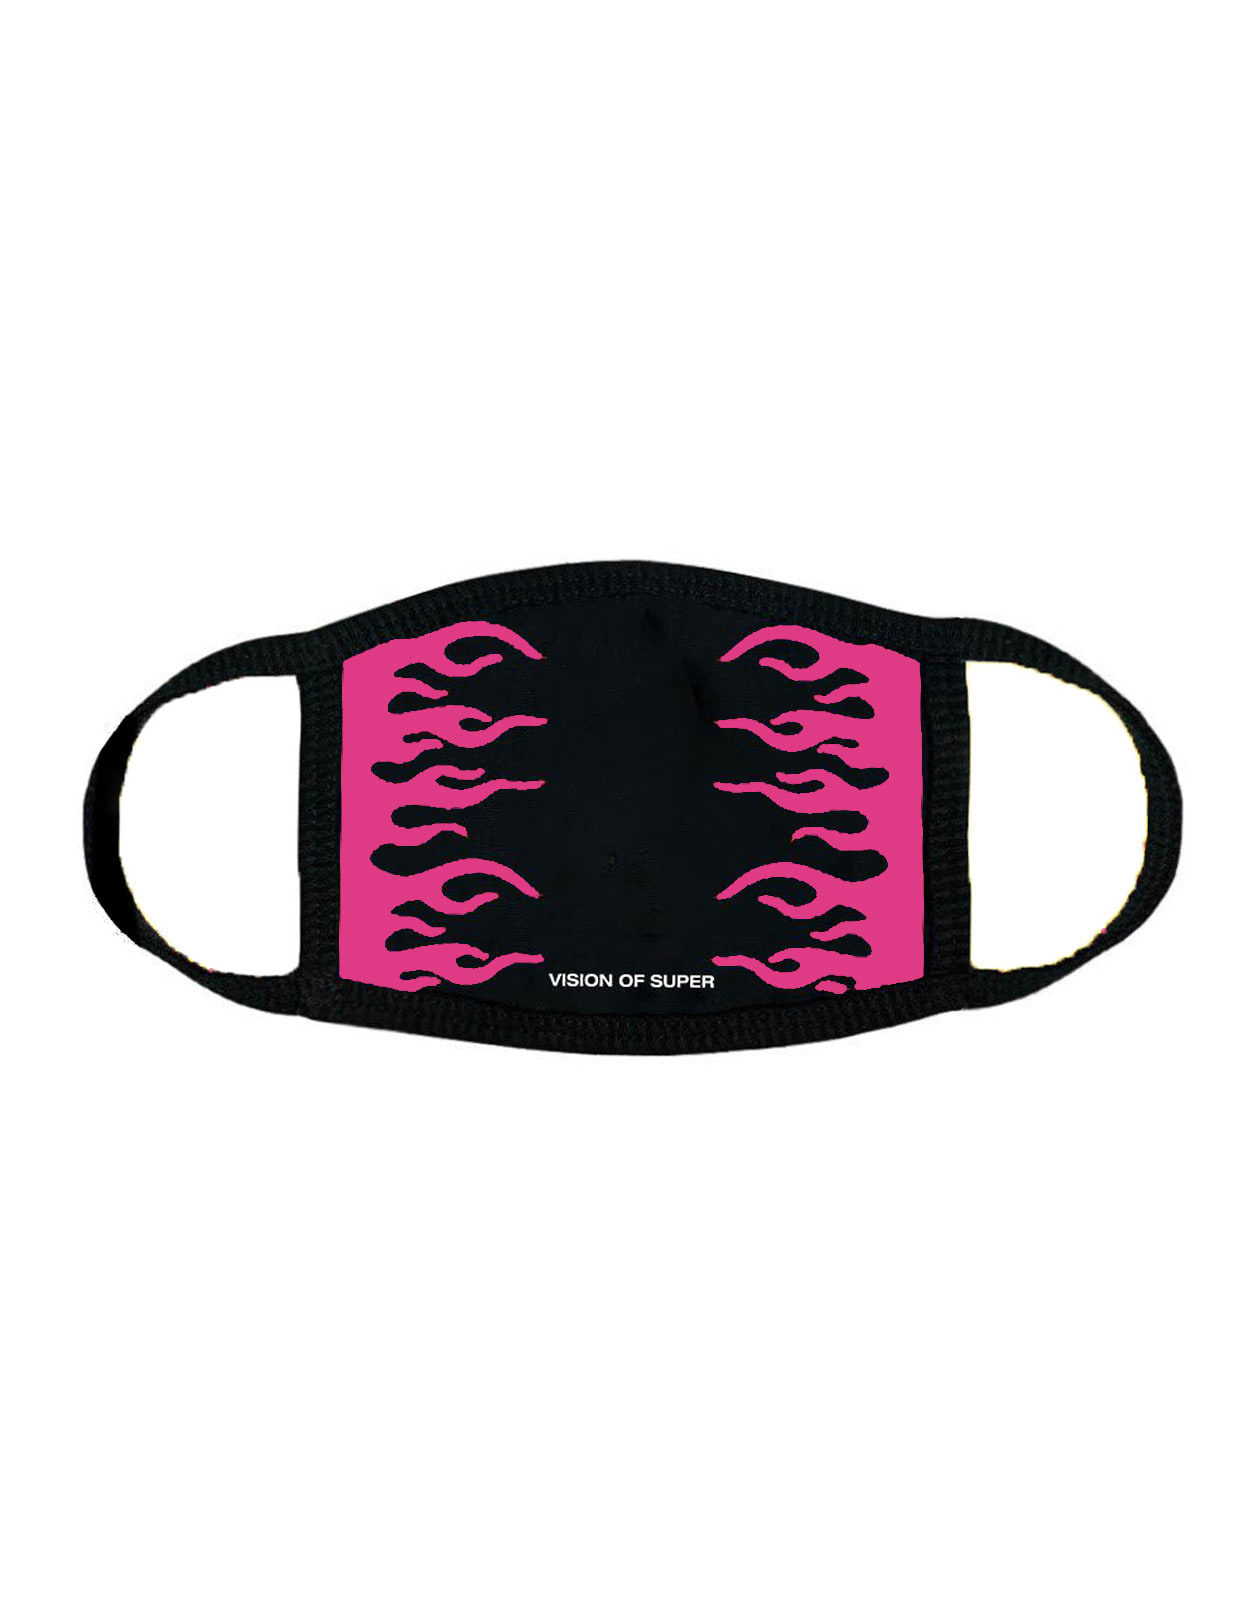 Vision of Super Black And Fuchsia Flames Face Mask